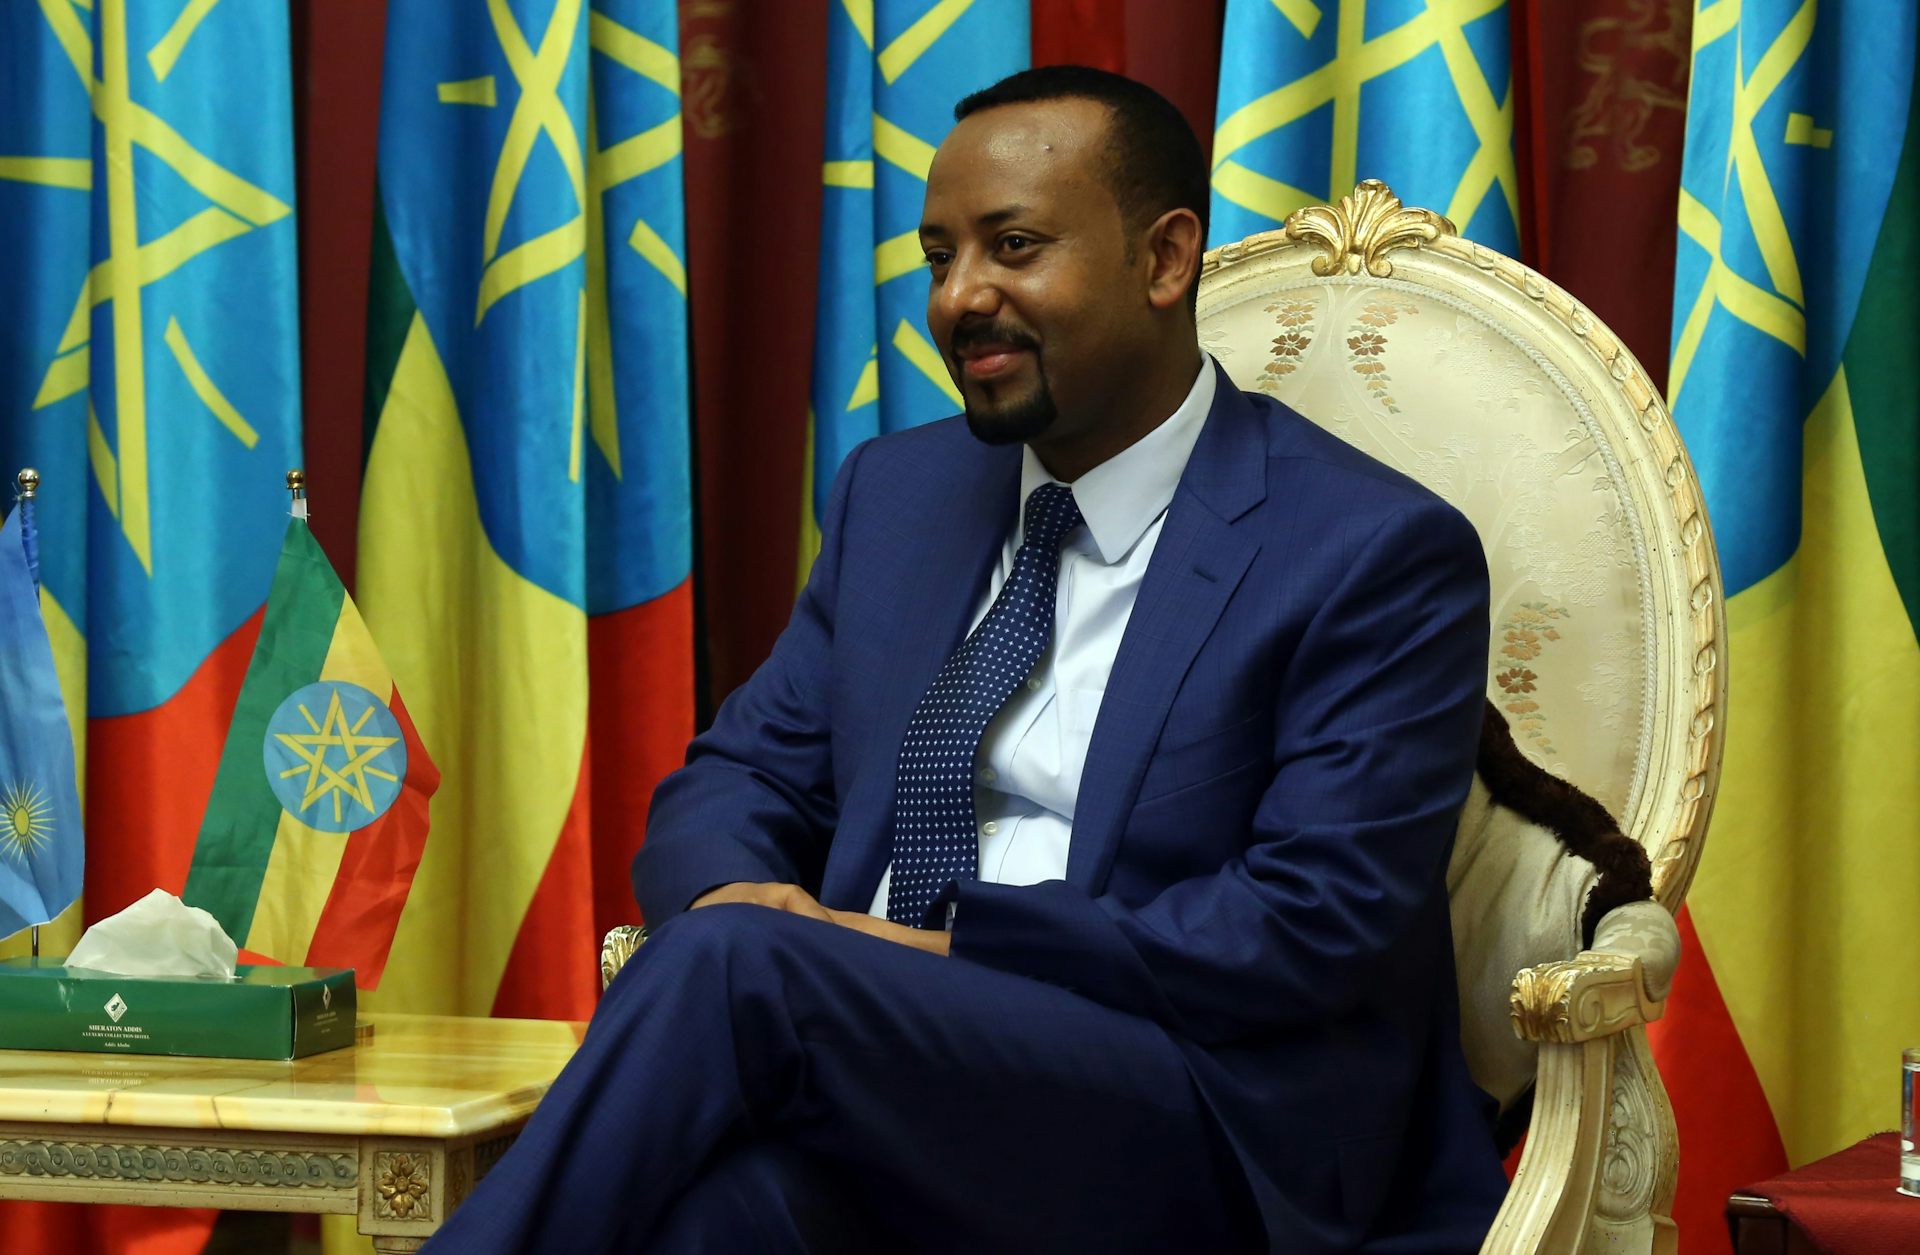 Ethiopia’s Poll Has Been Pushed Out by COVID-19. but There’s Much More at Play